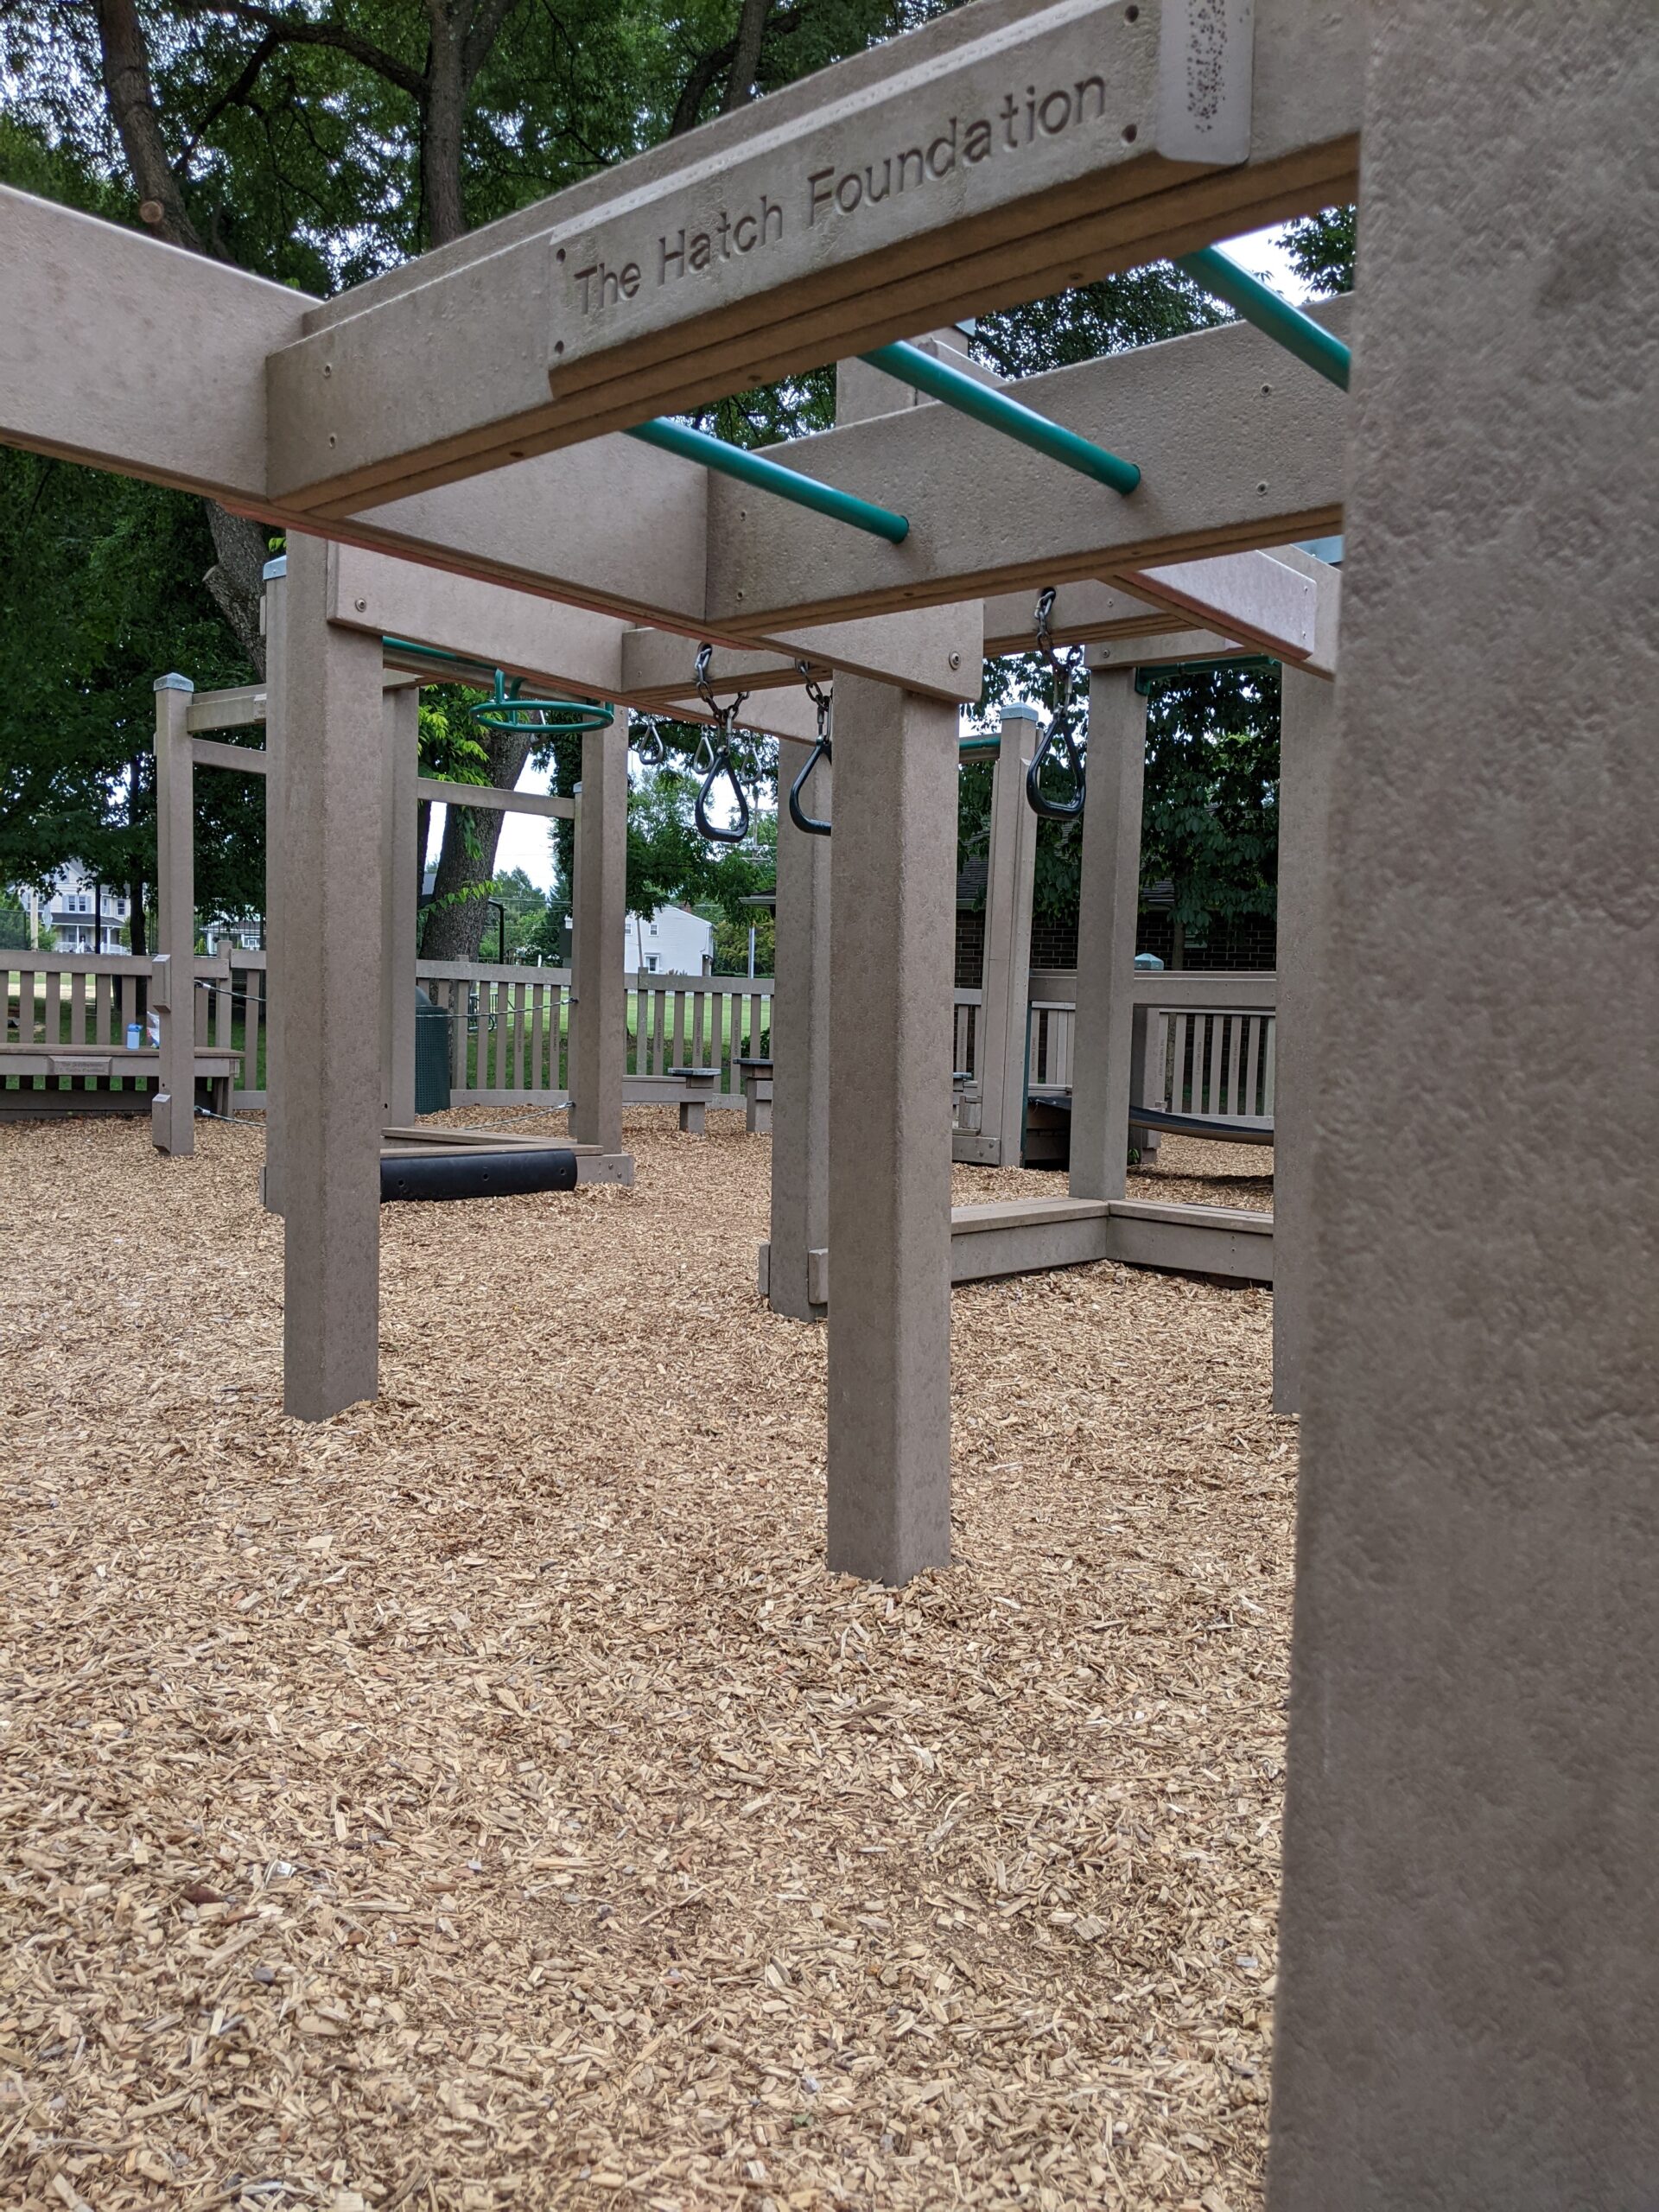 Frank Fullerton Memorial Park Playground in Moorestown NJ - FEATURES - Monkey Bars TALL image